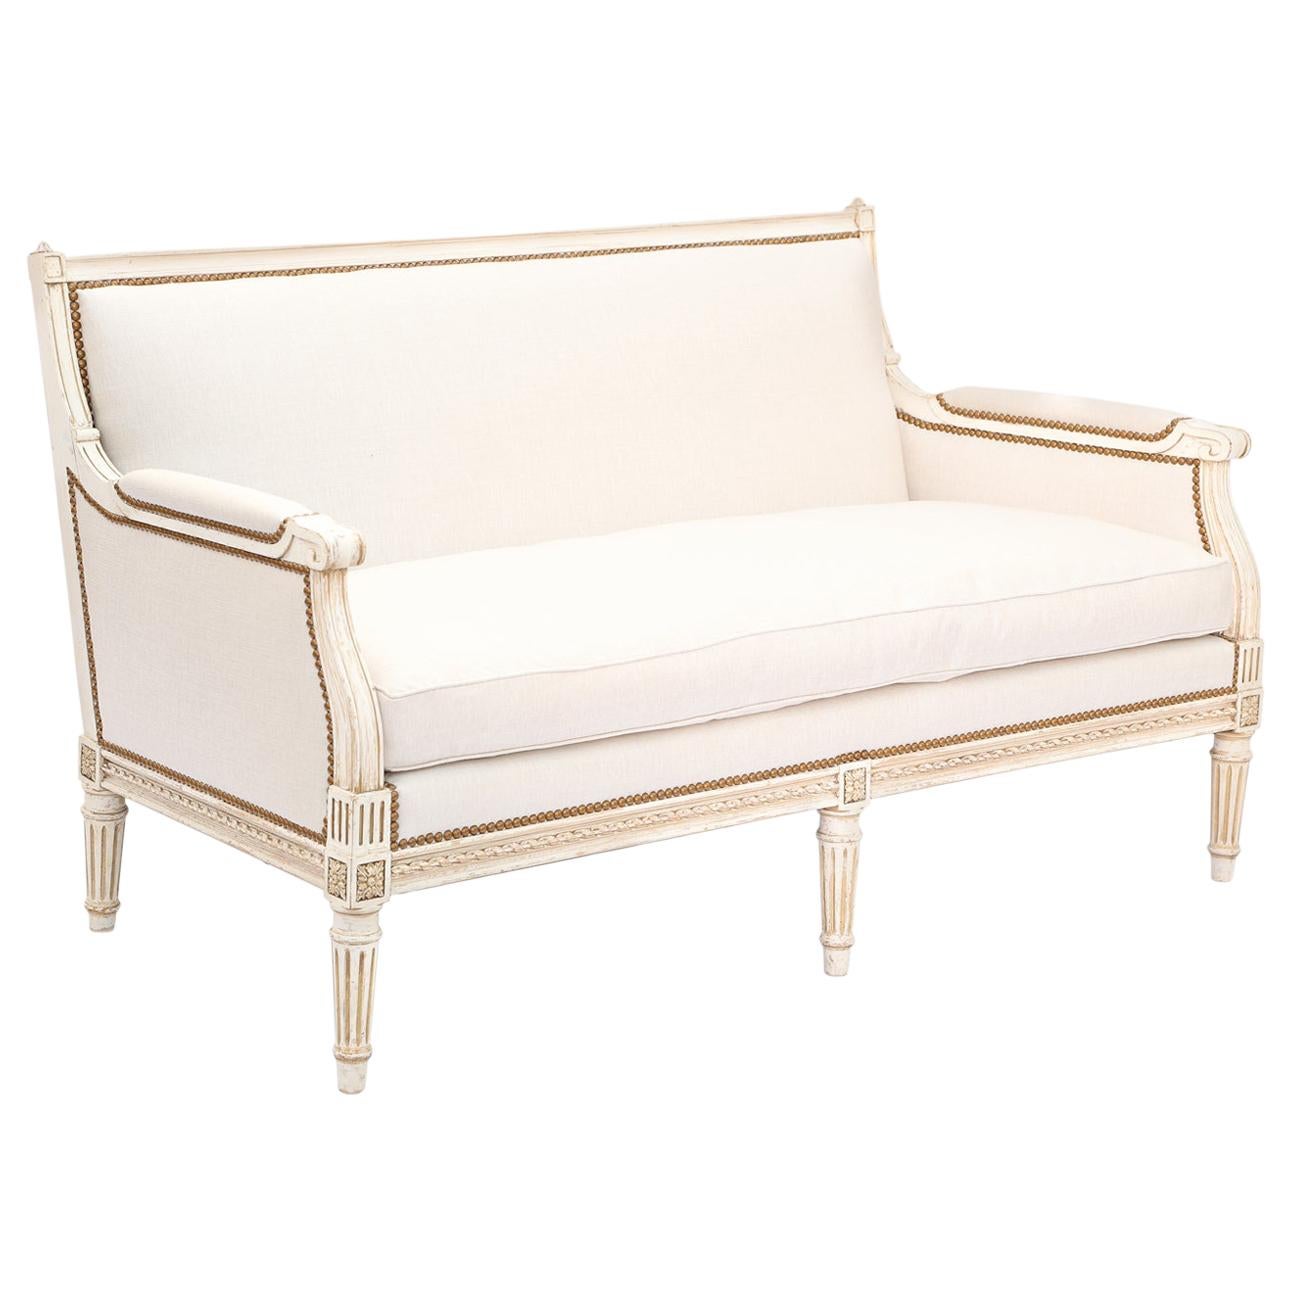 Painted Louis XVI Style Upholstered Sofa - Pair Available